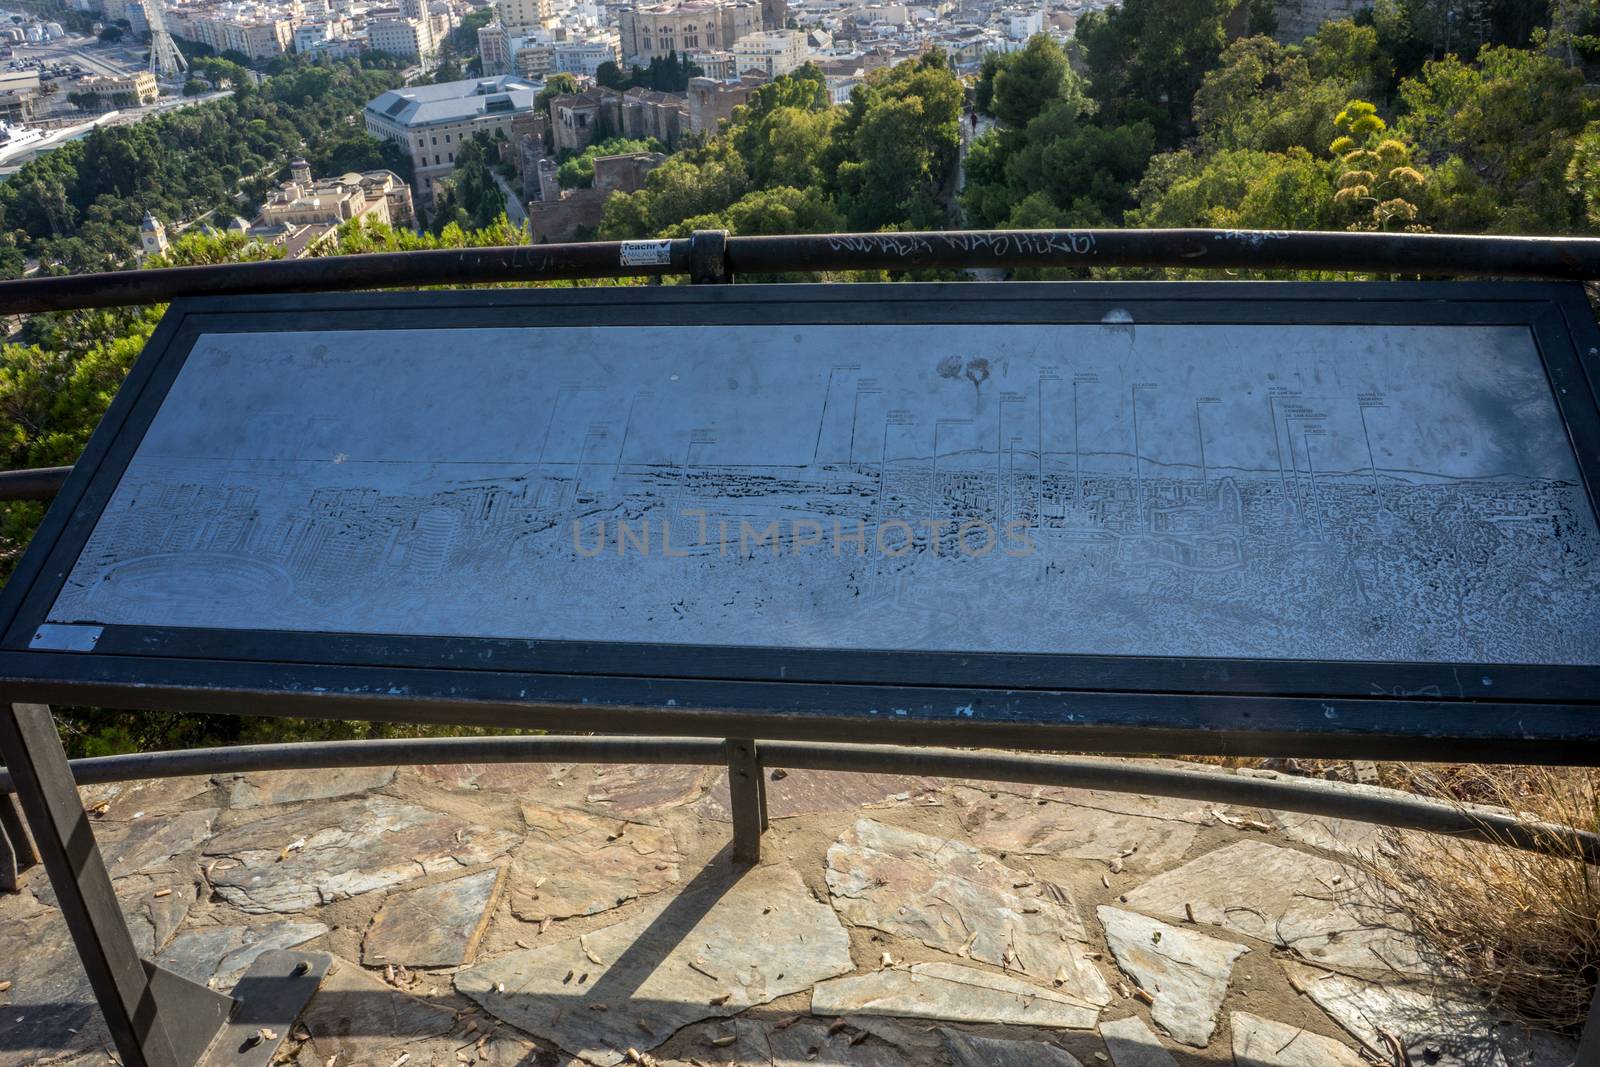 Cityscape of Malaga on a metal plat at the view point in Malaga, by ramana16